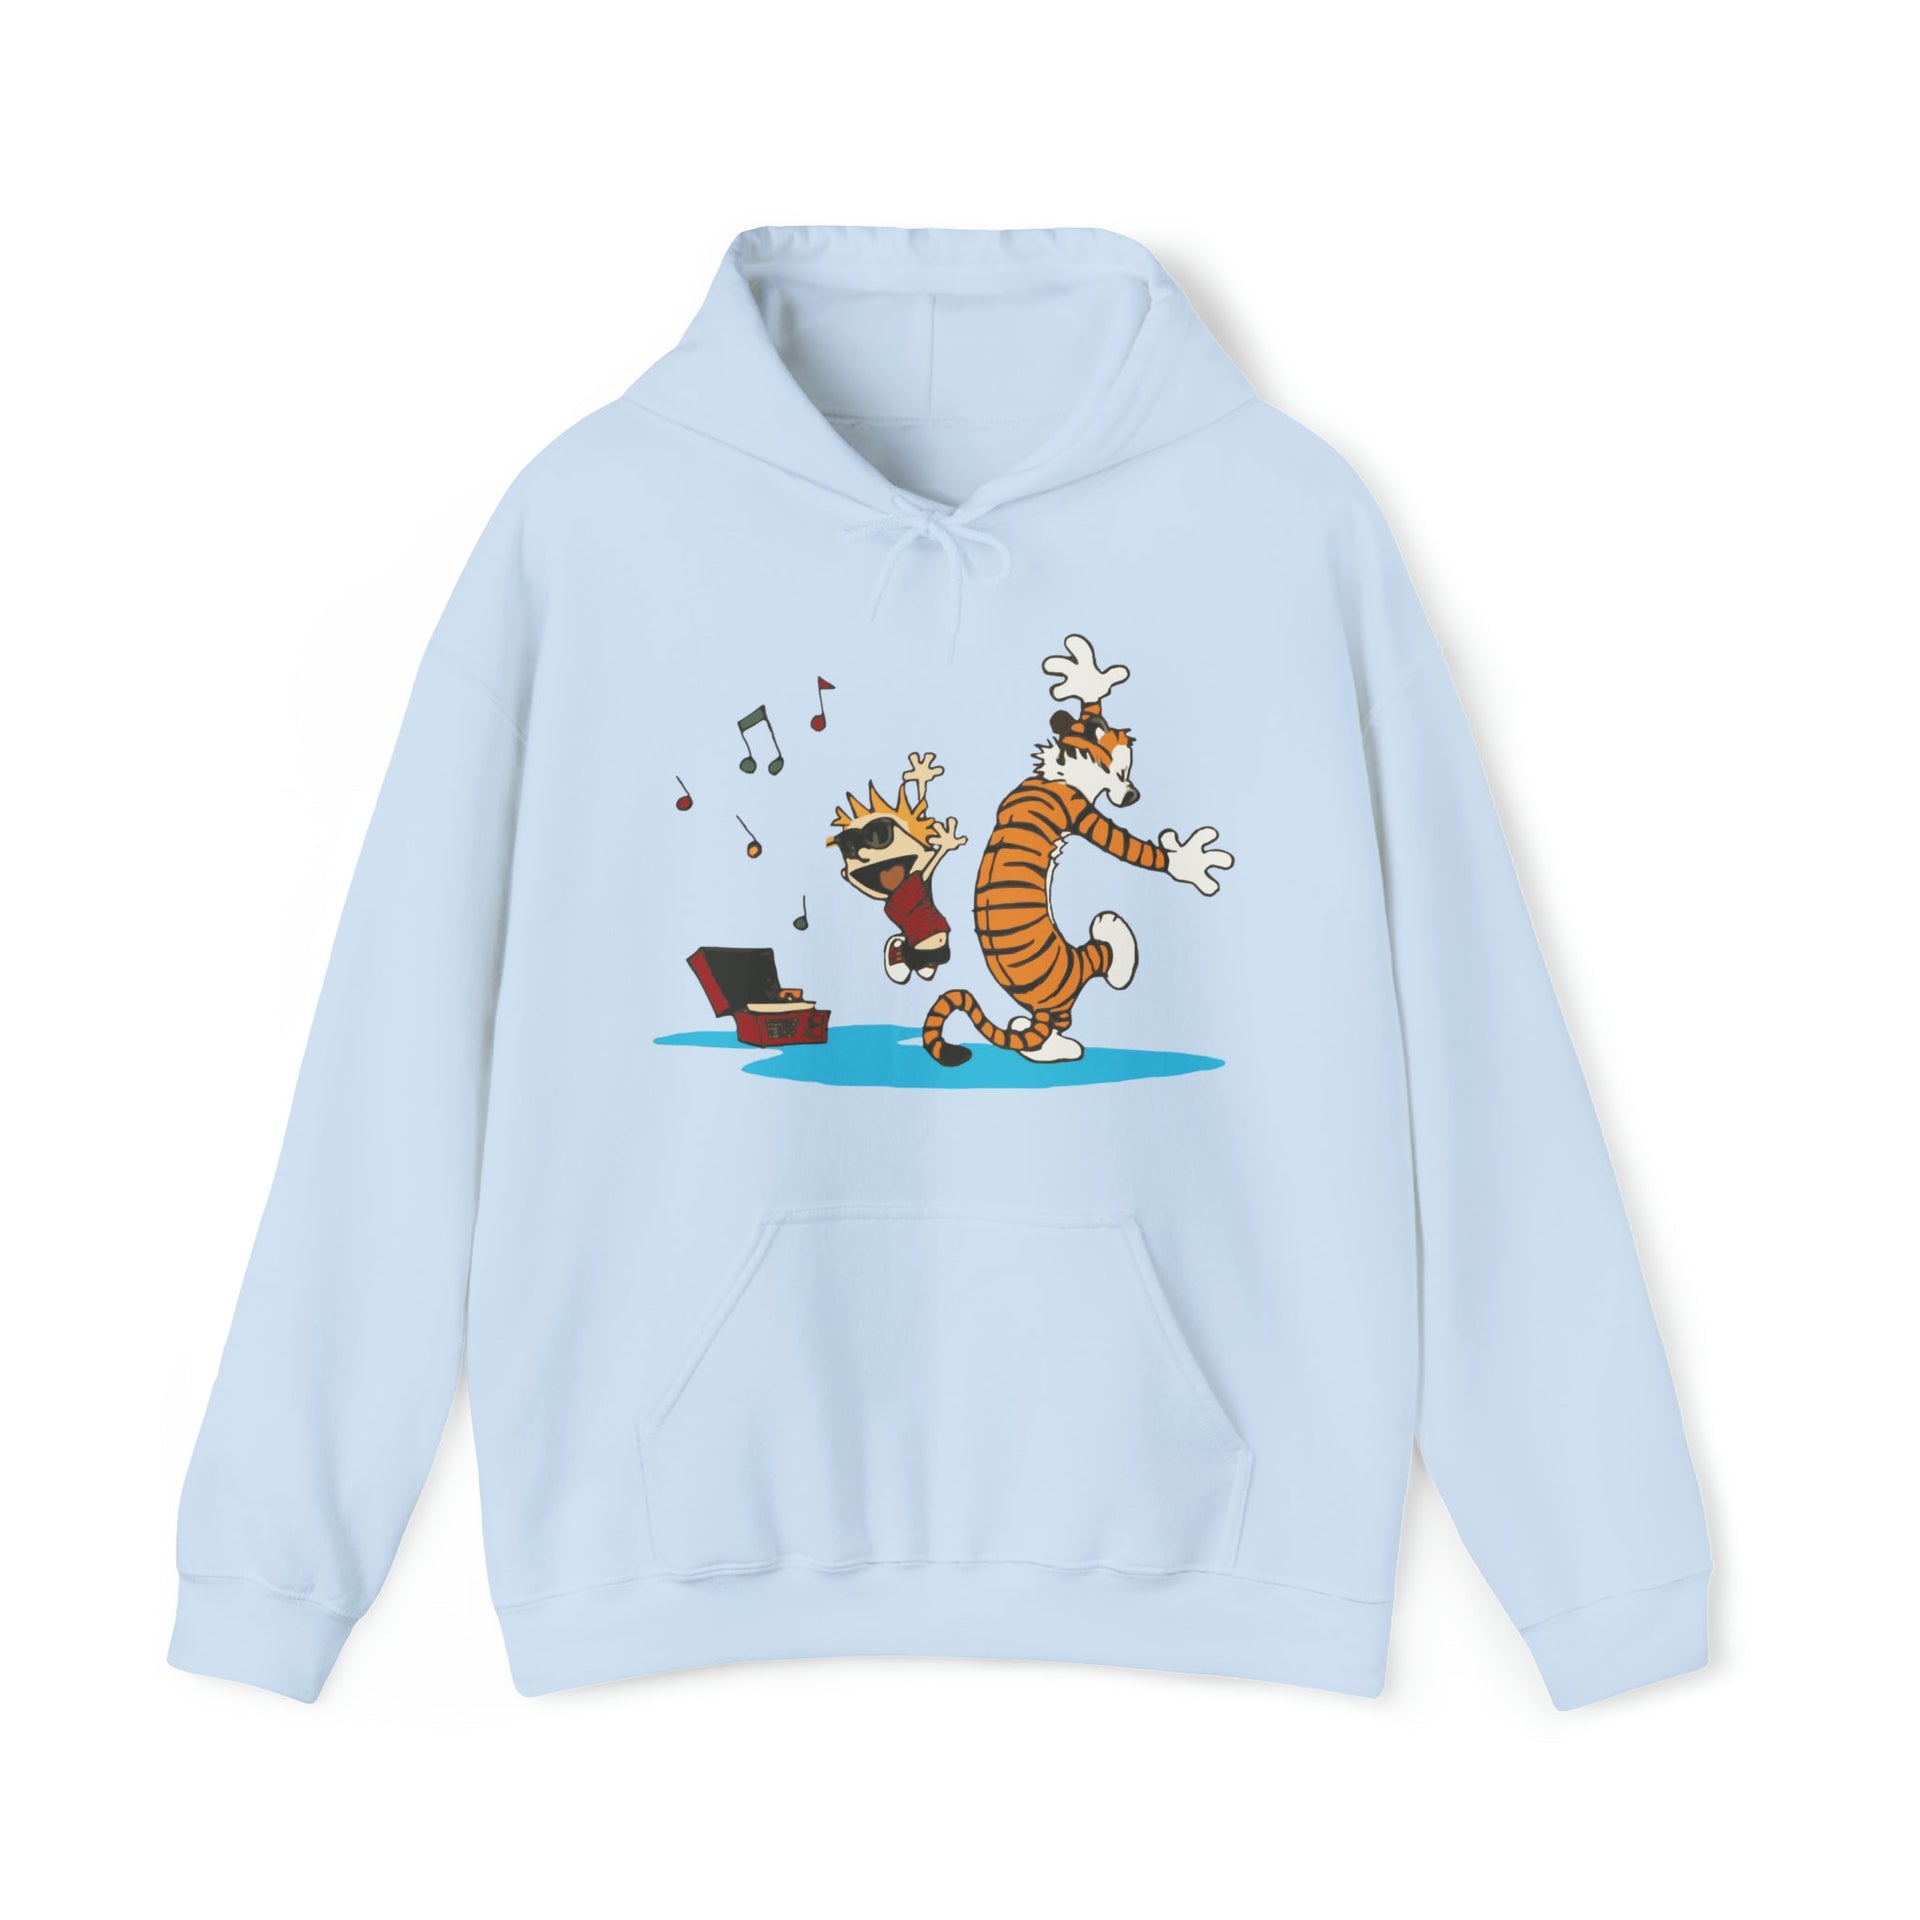 Calvin & Hobbes Dancing with Record Player Hoodie - Clothing - Harvey Ltd